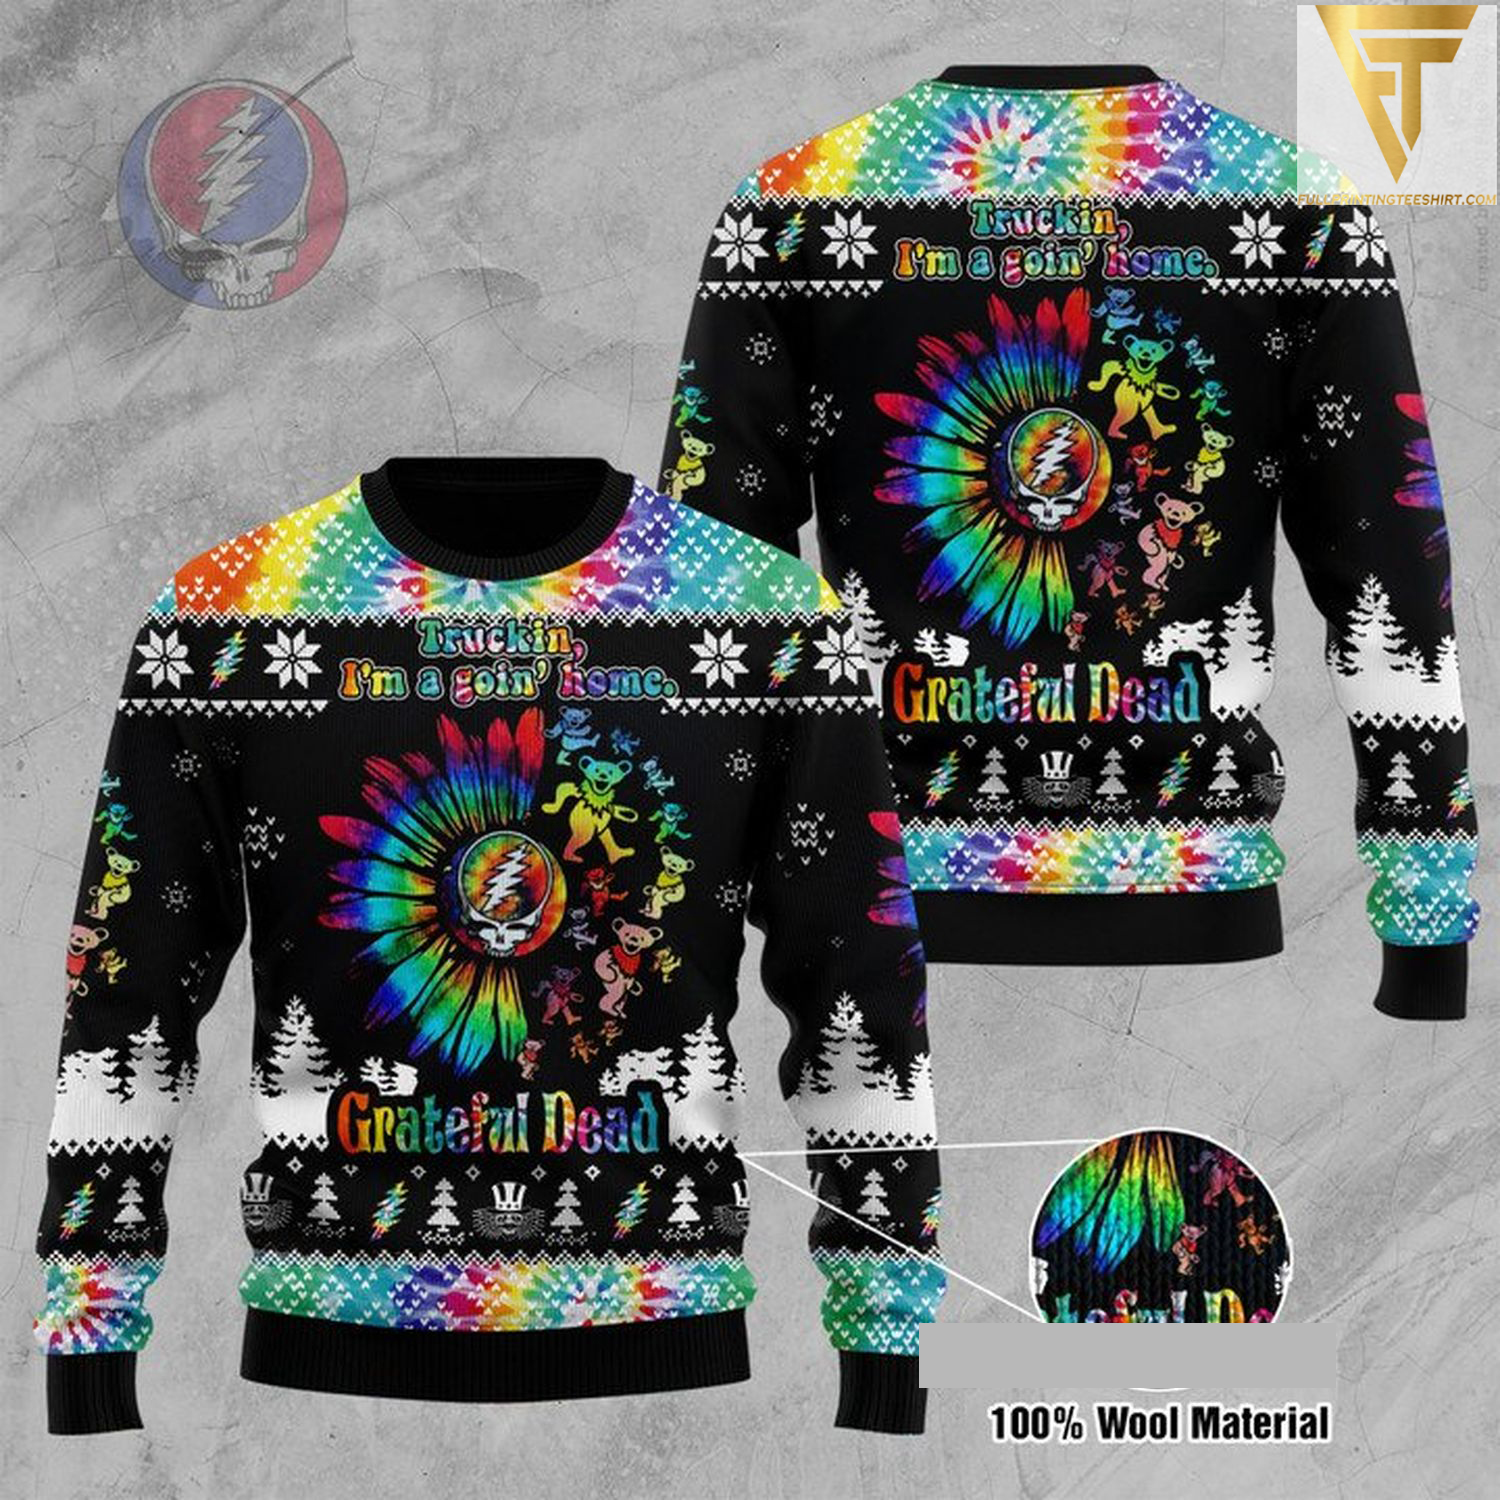 Hippie skull the grateful dead ugly christmas sweater - Copy (2)